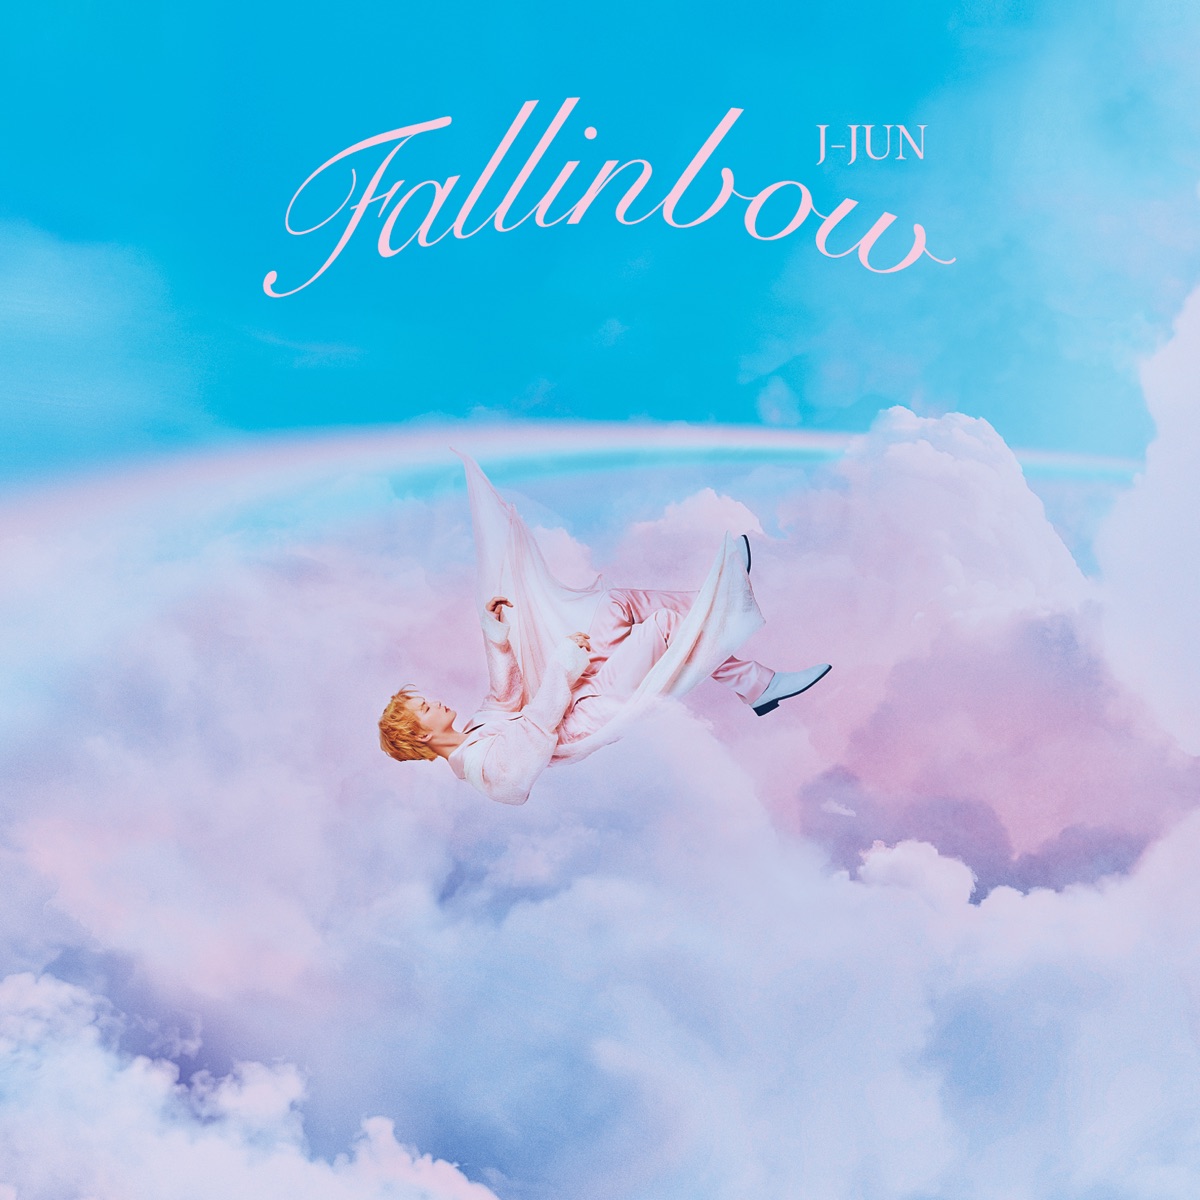 Cover art for『J-JUN with Mika Nakashima - One Heart』from the release『Fallinbow